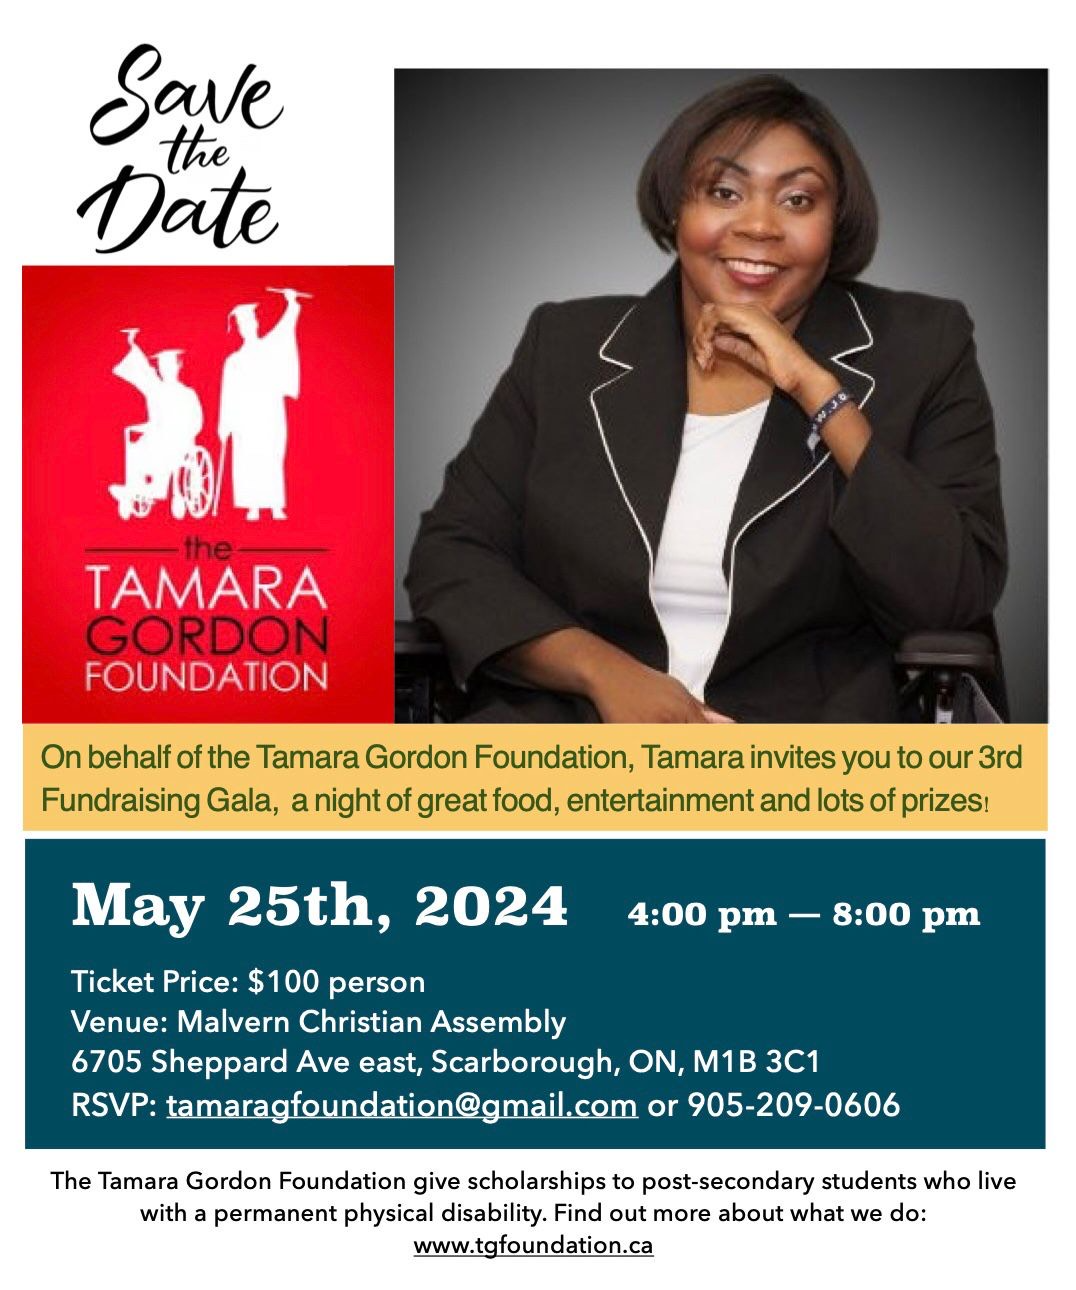 Picture of Tamara Gordon, a young black woman with short hair wearing a black blazer. The poster reads: "Save the Date - the Tamara Gordon Foundation", May 25th, 2024, from 4 pm to 8 pm, at Malvern Christian Assembly. Scarborough.